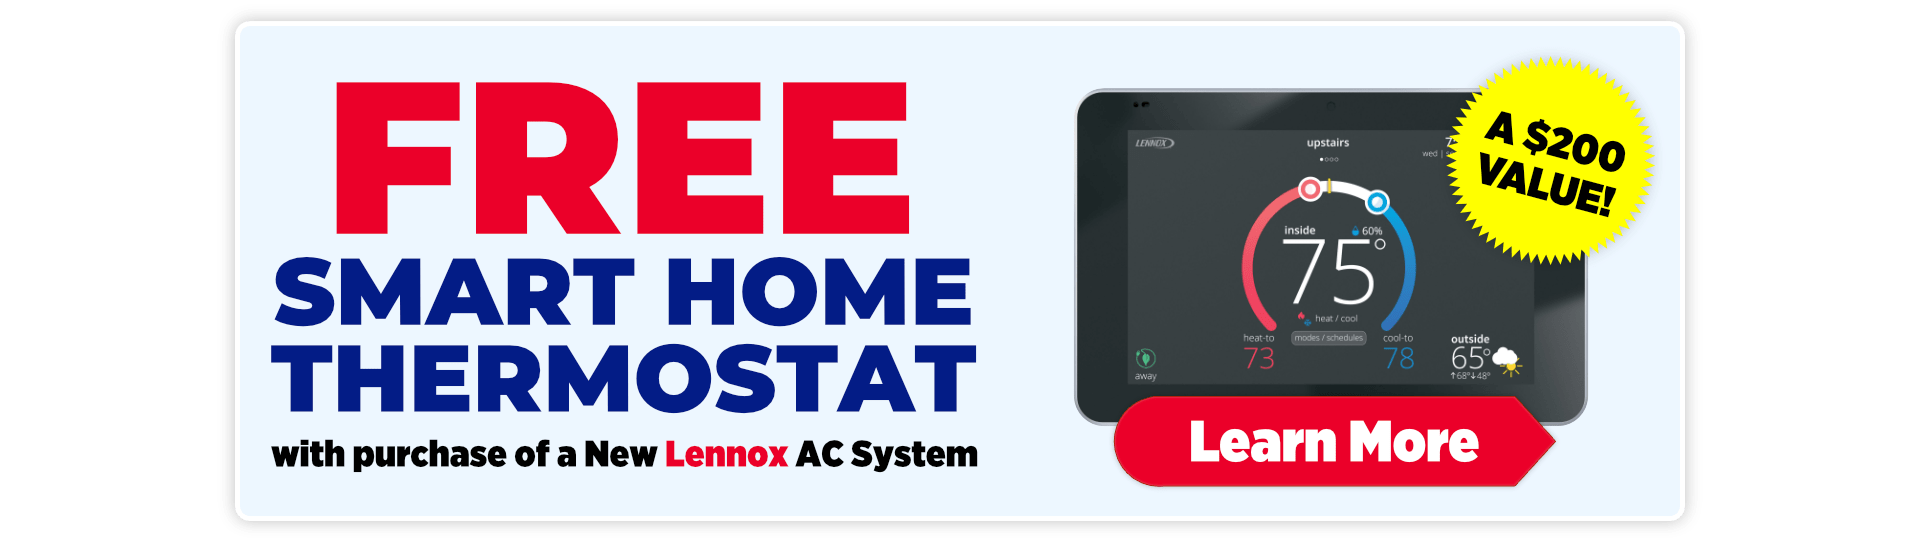 Get a FREE Smart Home Thermostat